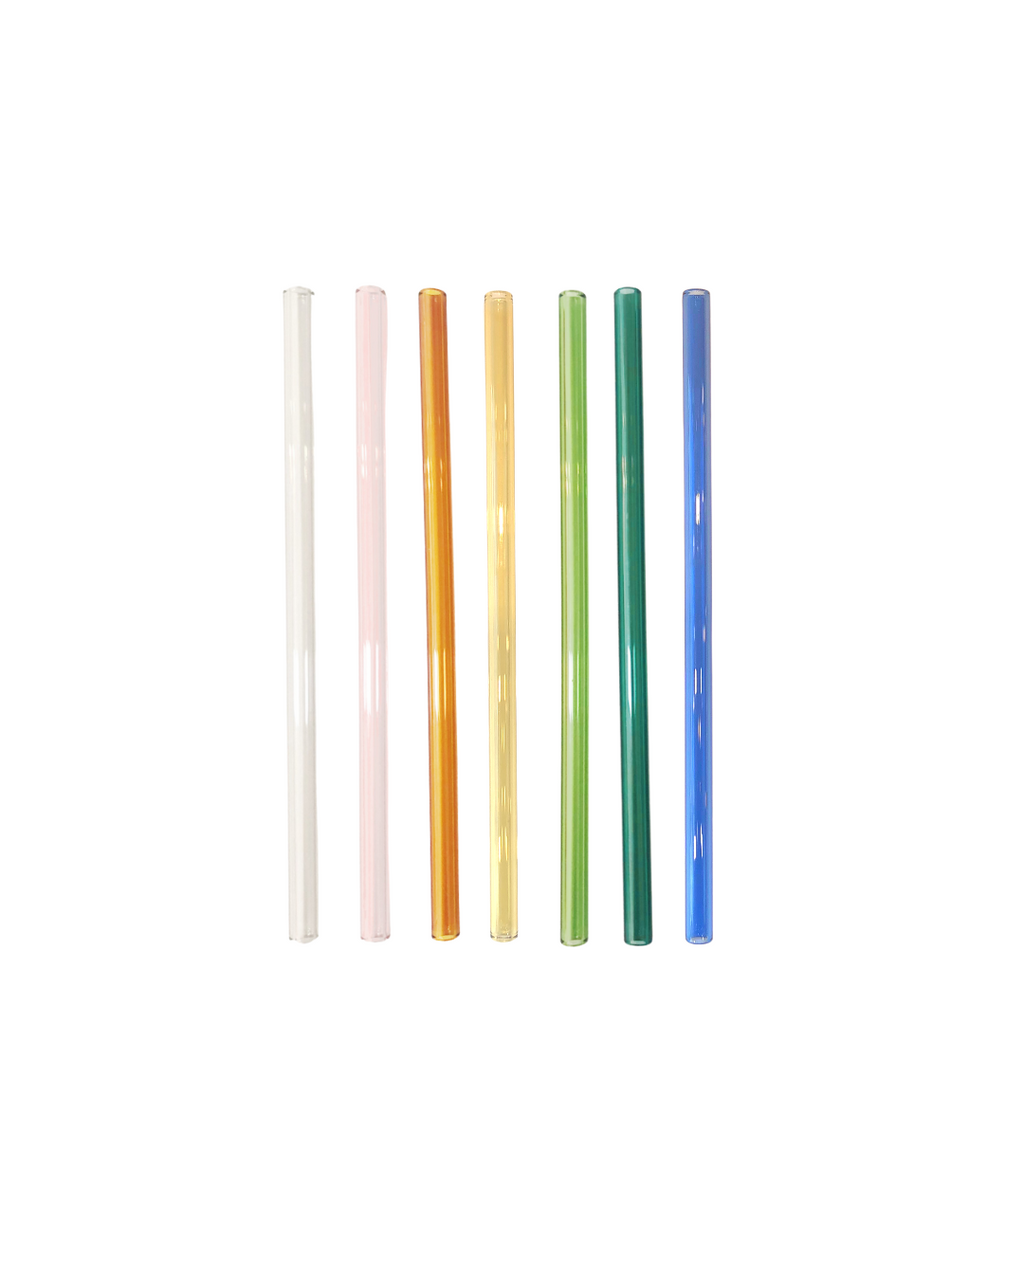 5 Pack of Colored Glass Straws Party Favors Reusable Straws Eco Friendly  Straws Colored Straws Skinny Straw Thin Straws 